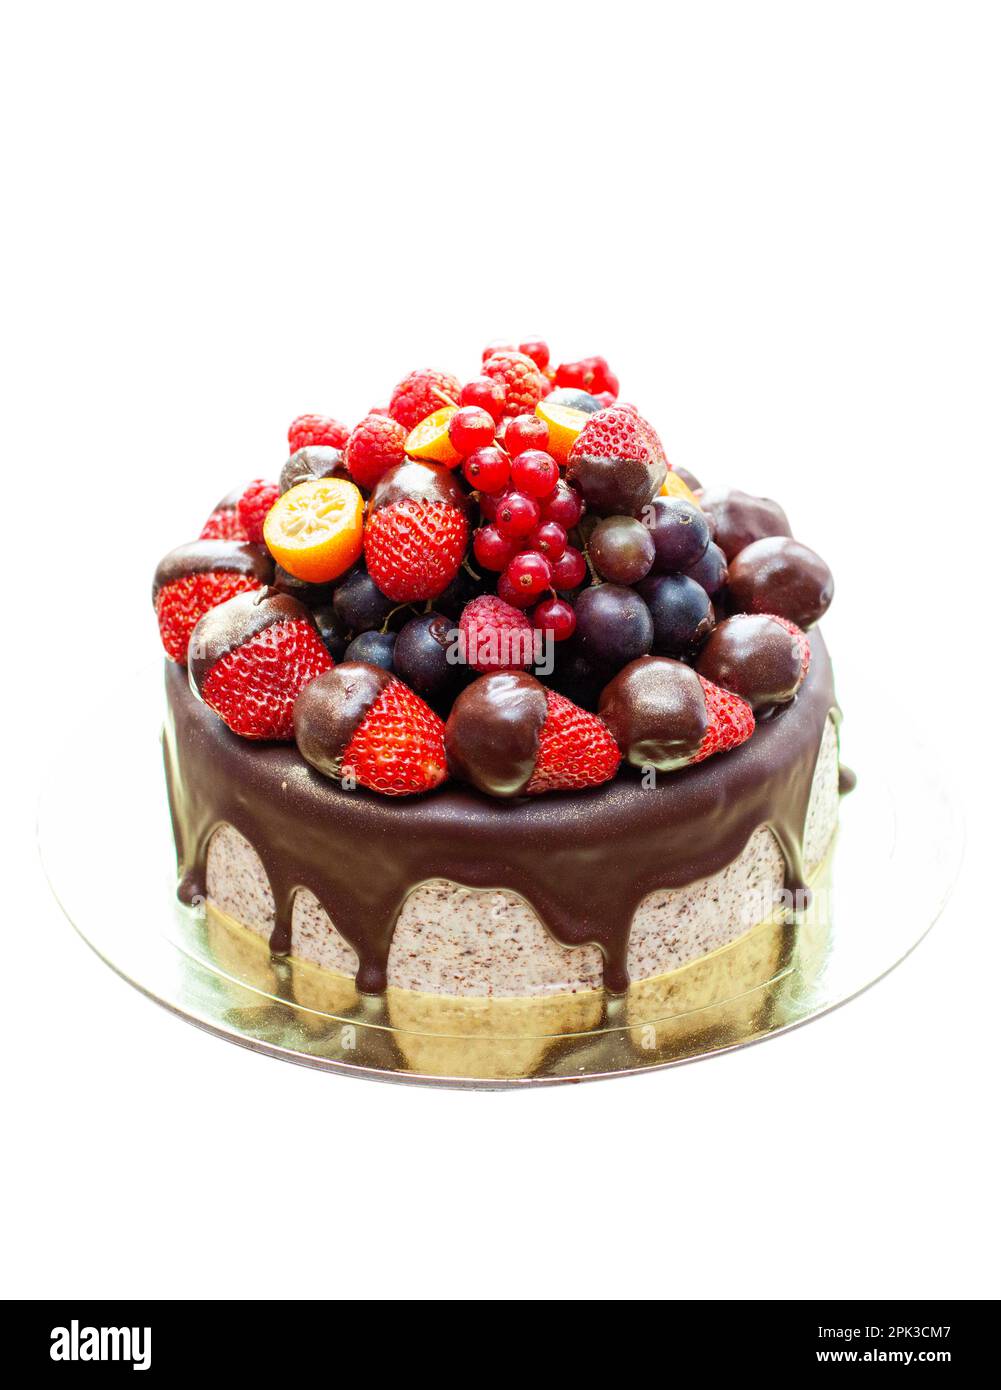 Cake decorated with strawberry dipped into melted chocolate, raspberry, blueberry and red currant. Isolated on plain background Stock Photo